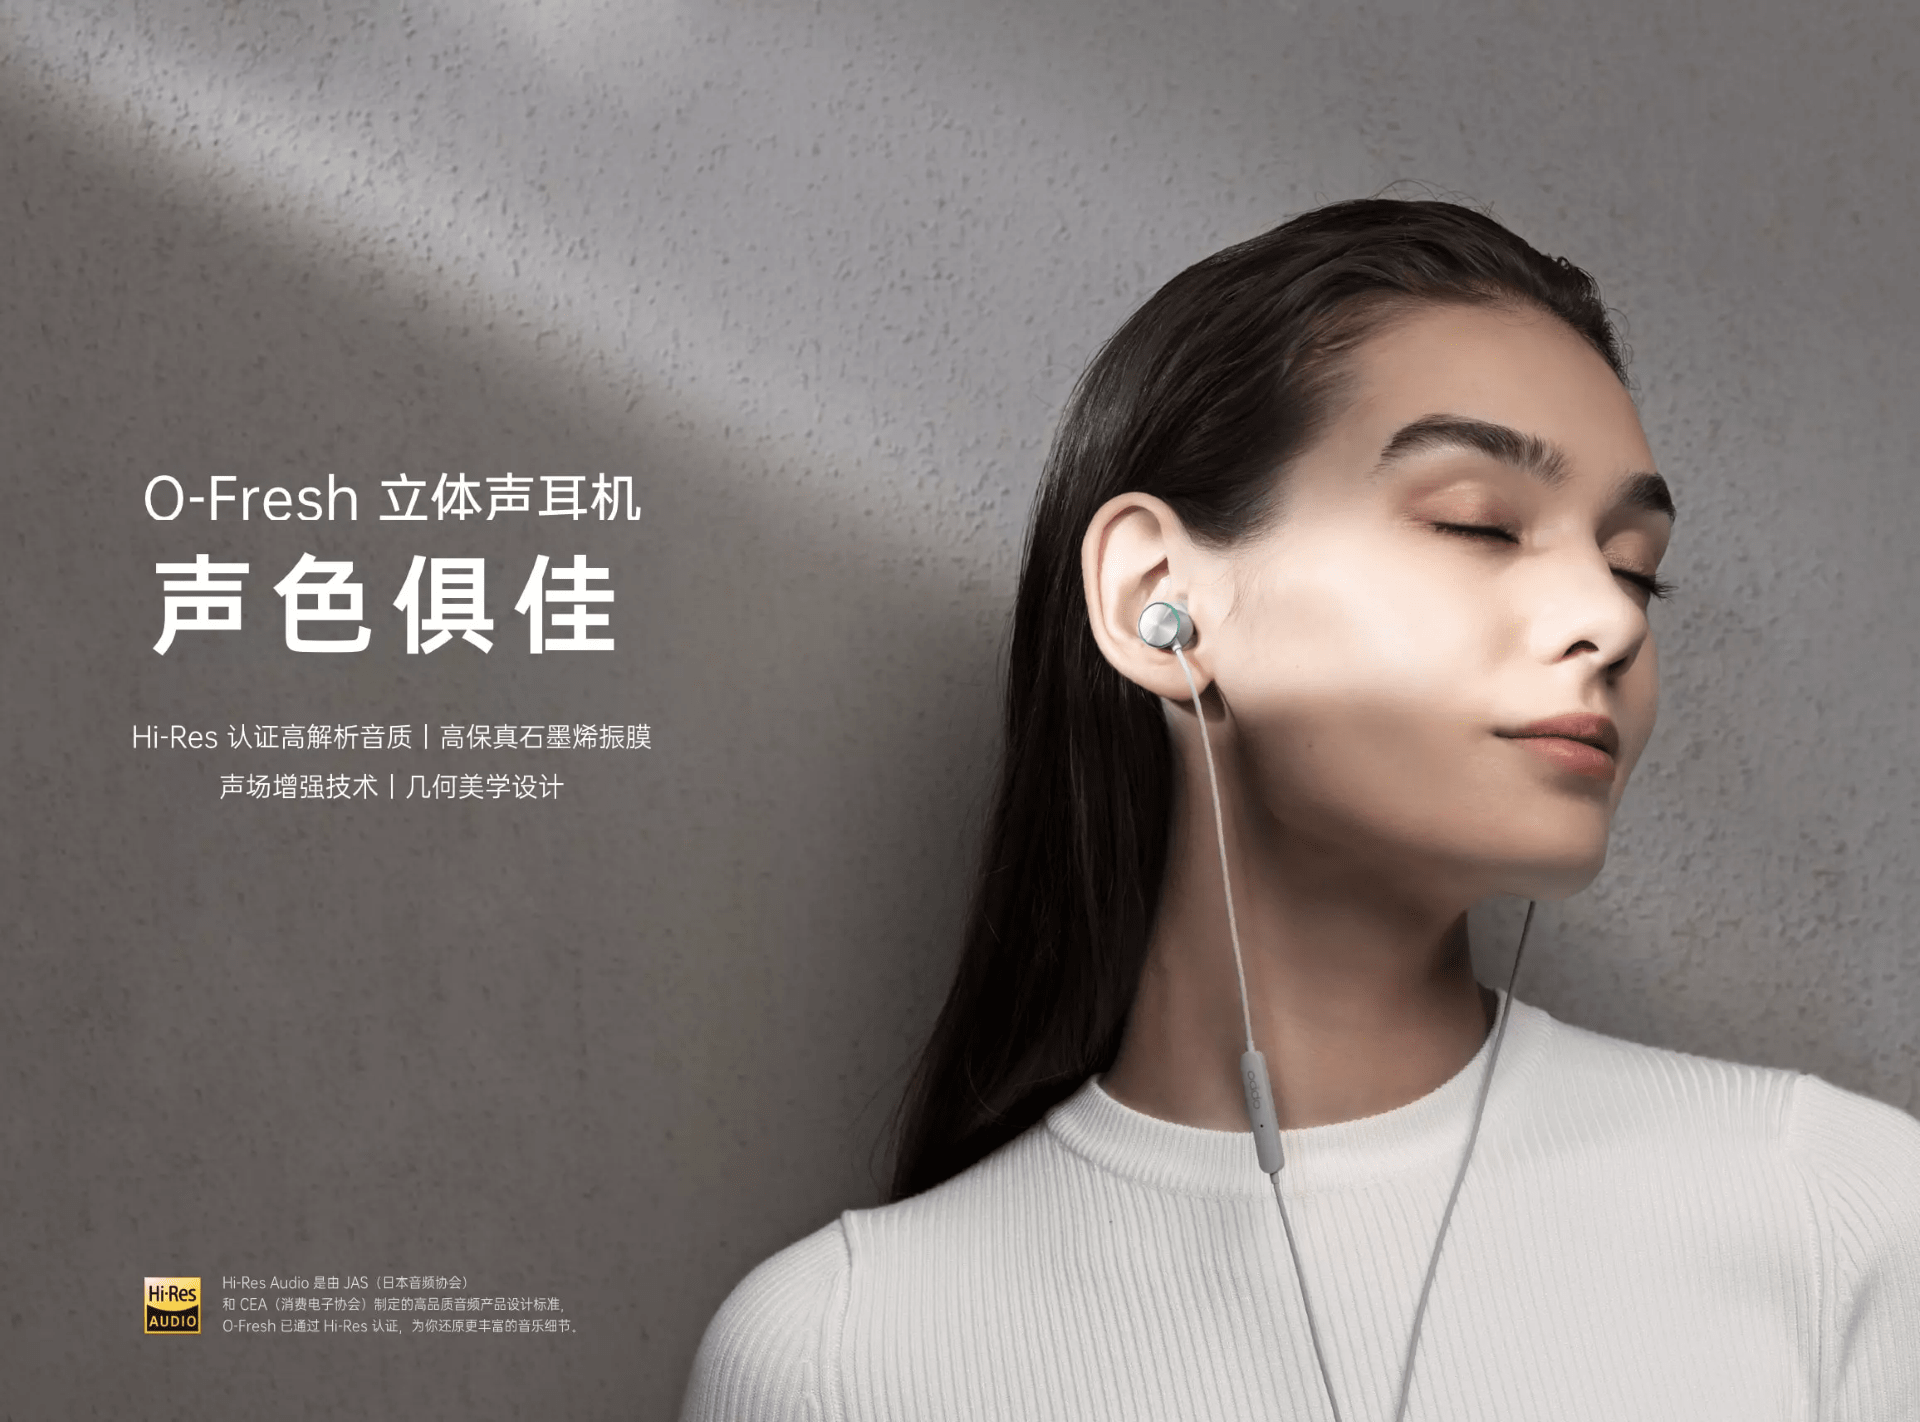 OPPO presents O-Fresh headphones with graphene diaphragm and Hi-Res Audio